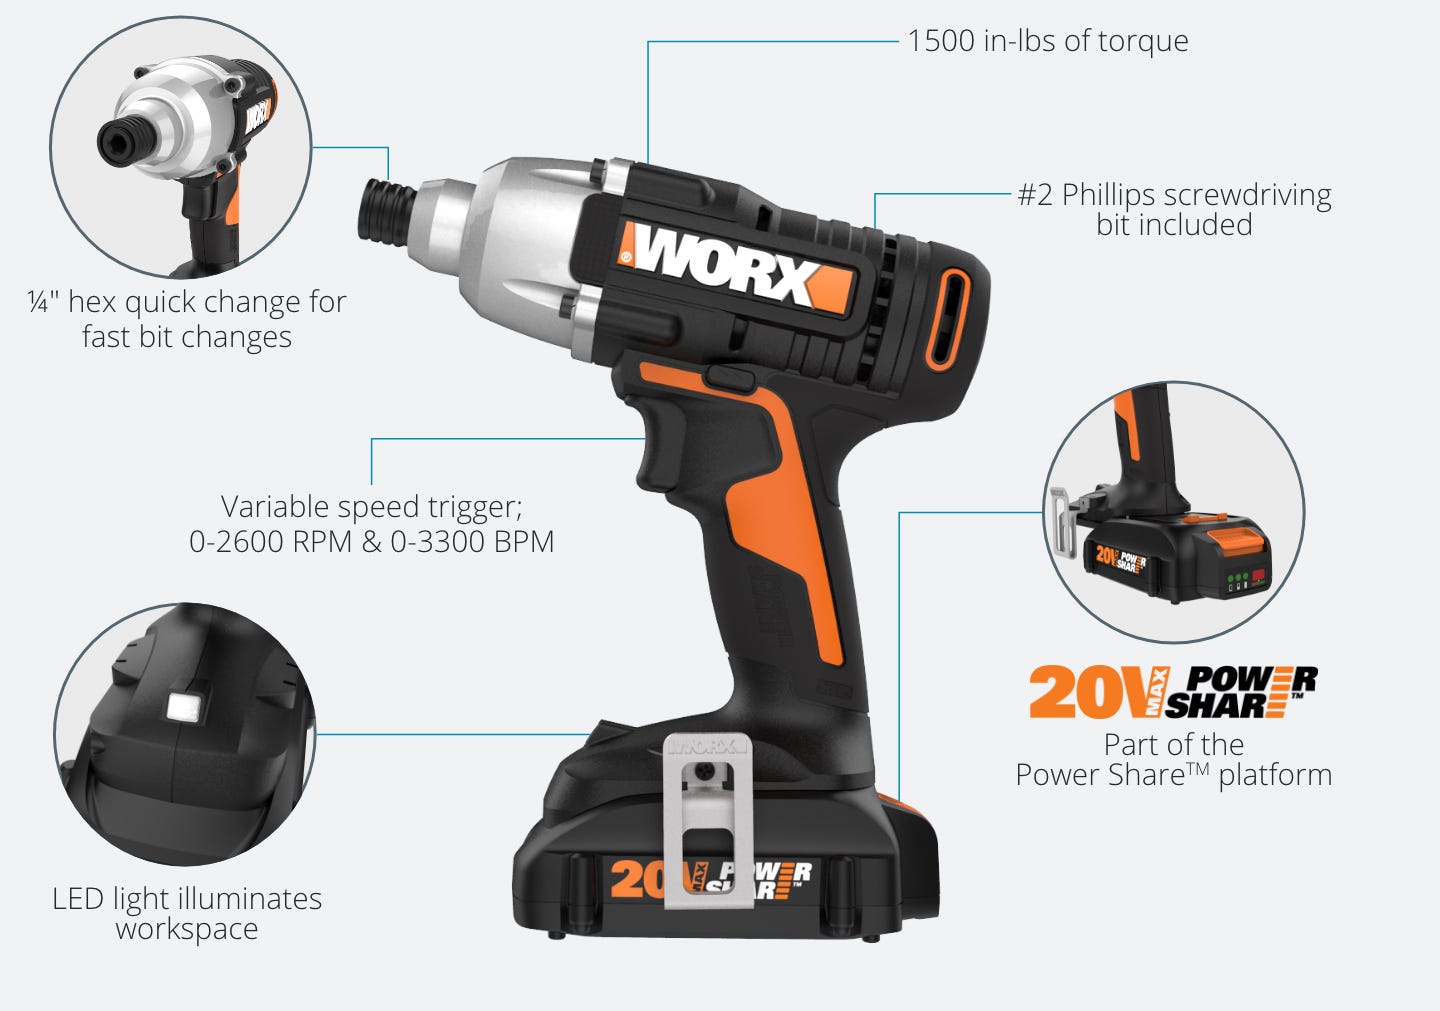 impact driver featuring: 1/4 inch hex quick change for fast bit changes, variable speed trigger, LED light, 1500 in-lbs of torque, #2 phillips bit included, part of the power share platform